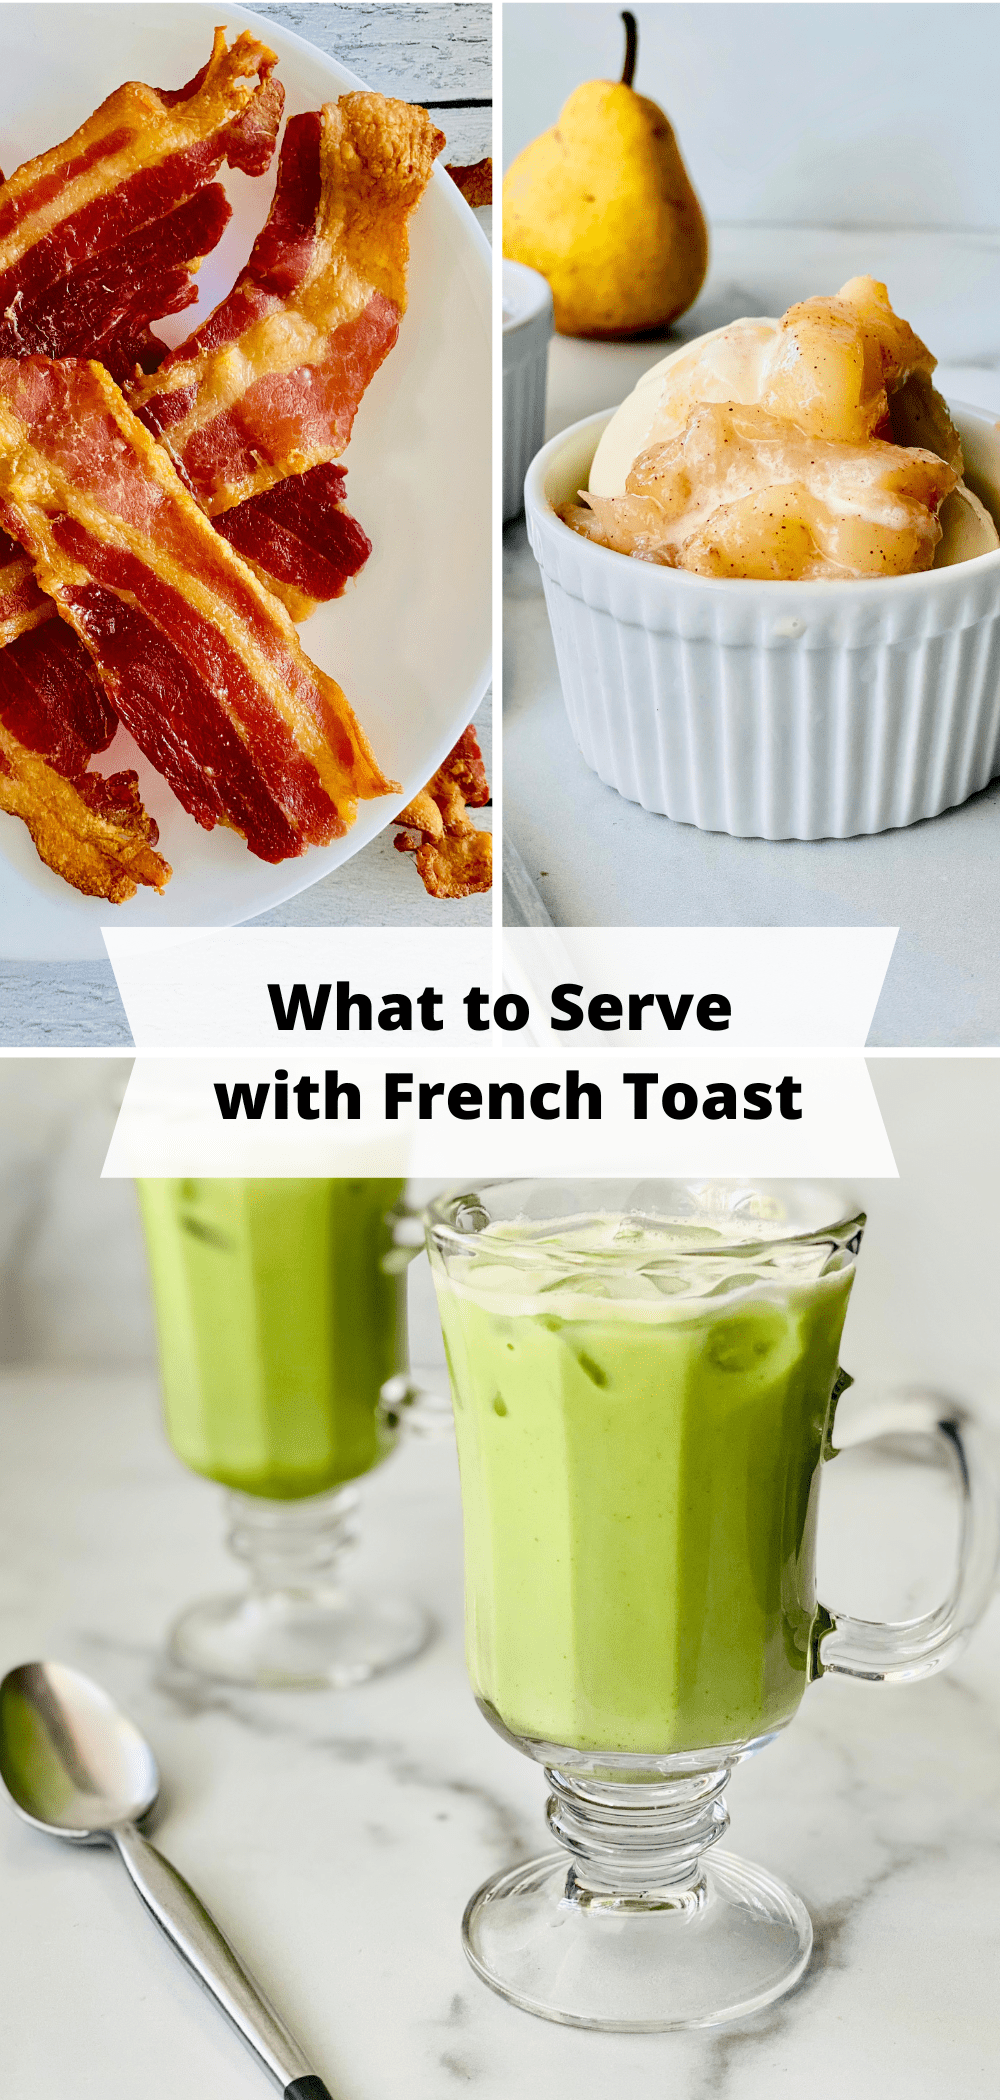 Pictures of green matcha tea, crispy bacon, and stewed pears.